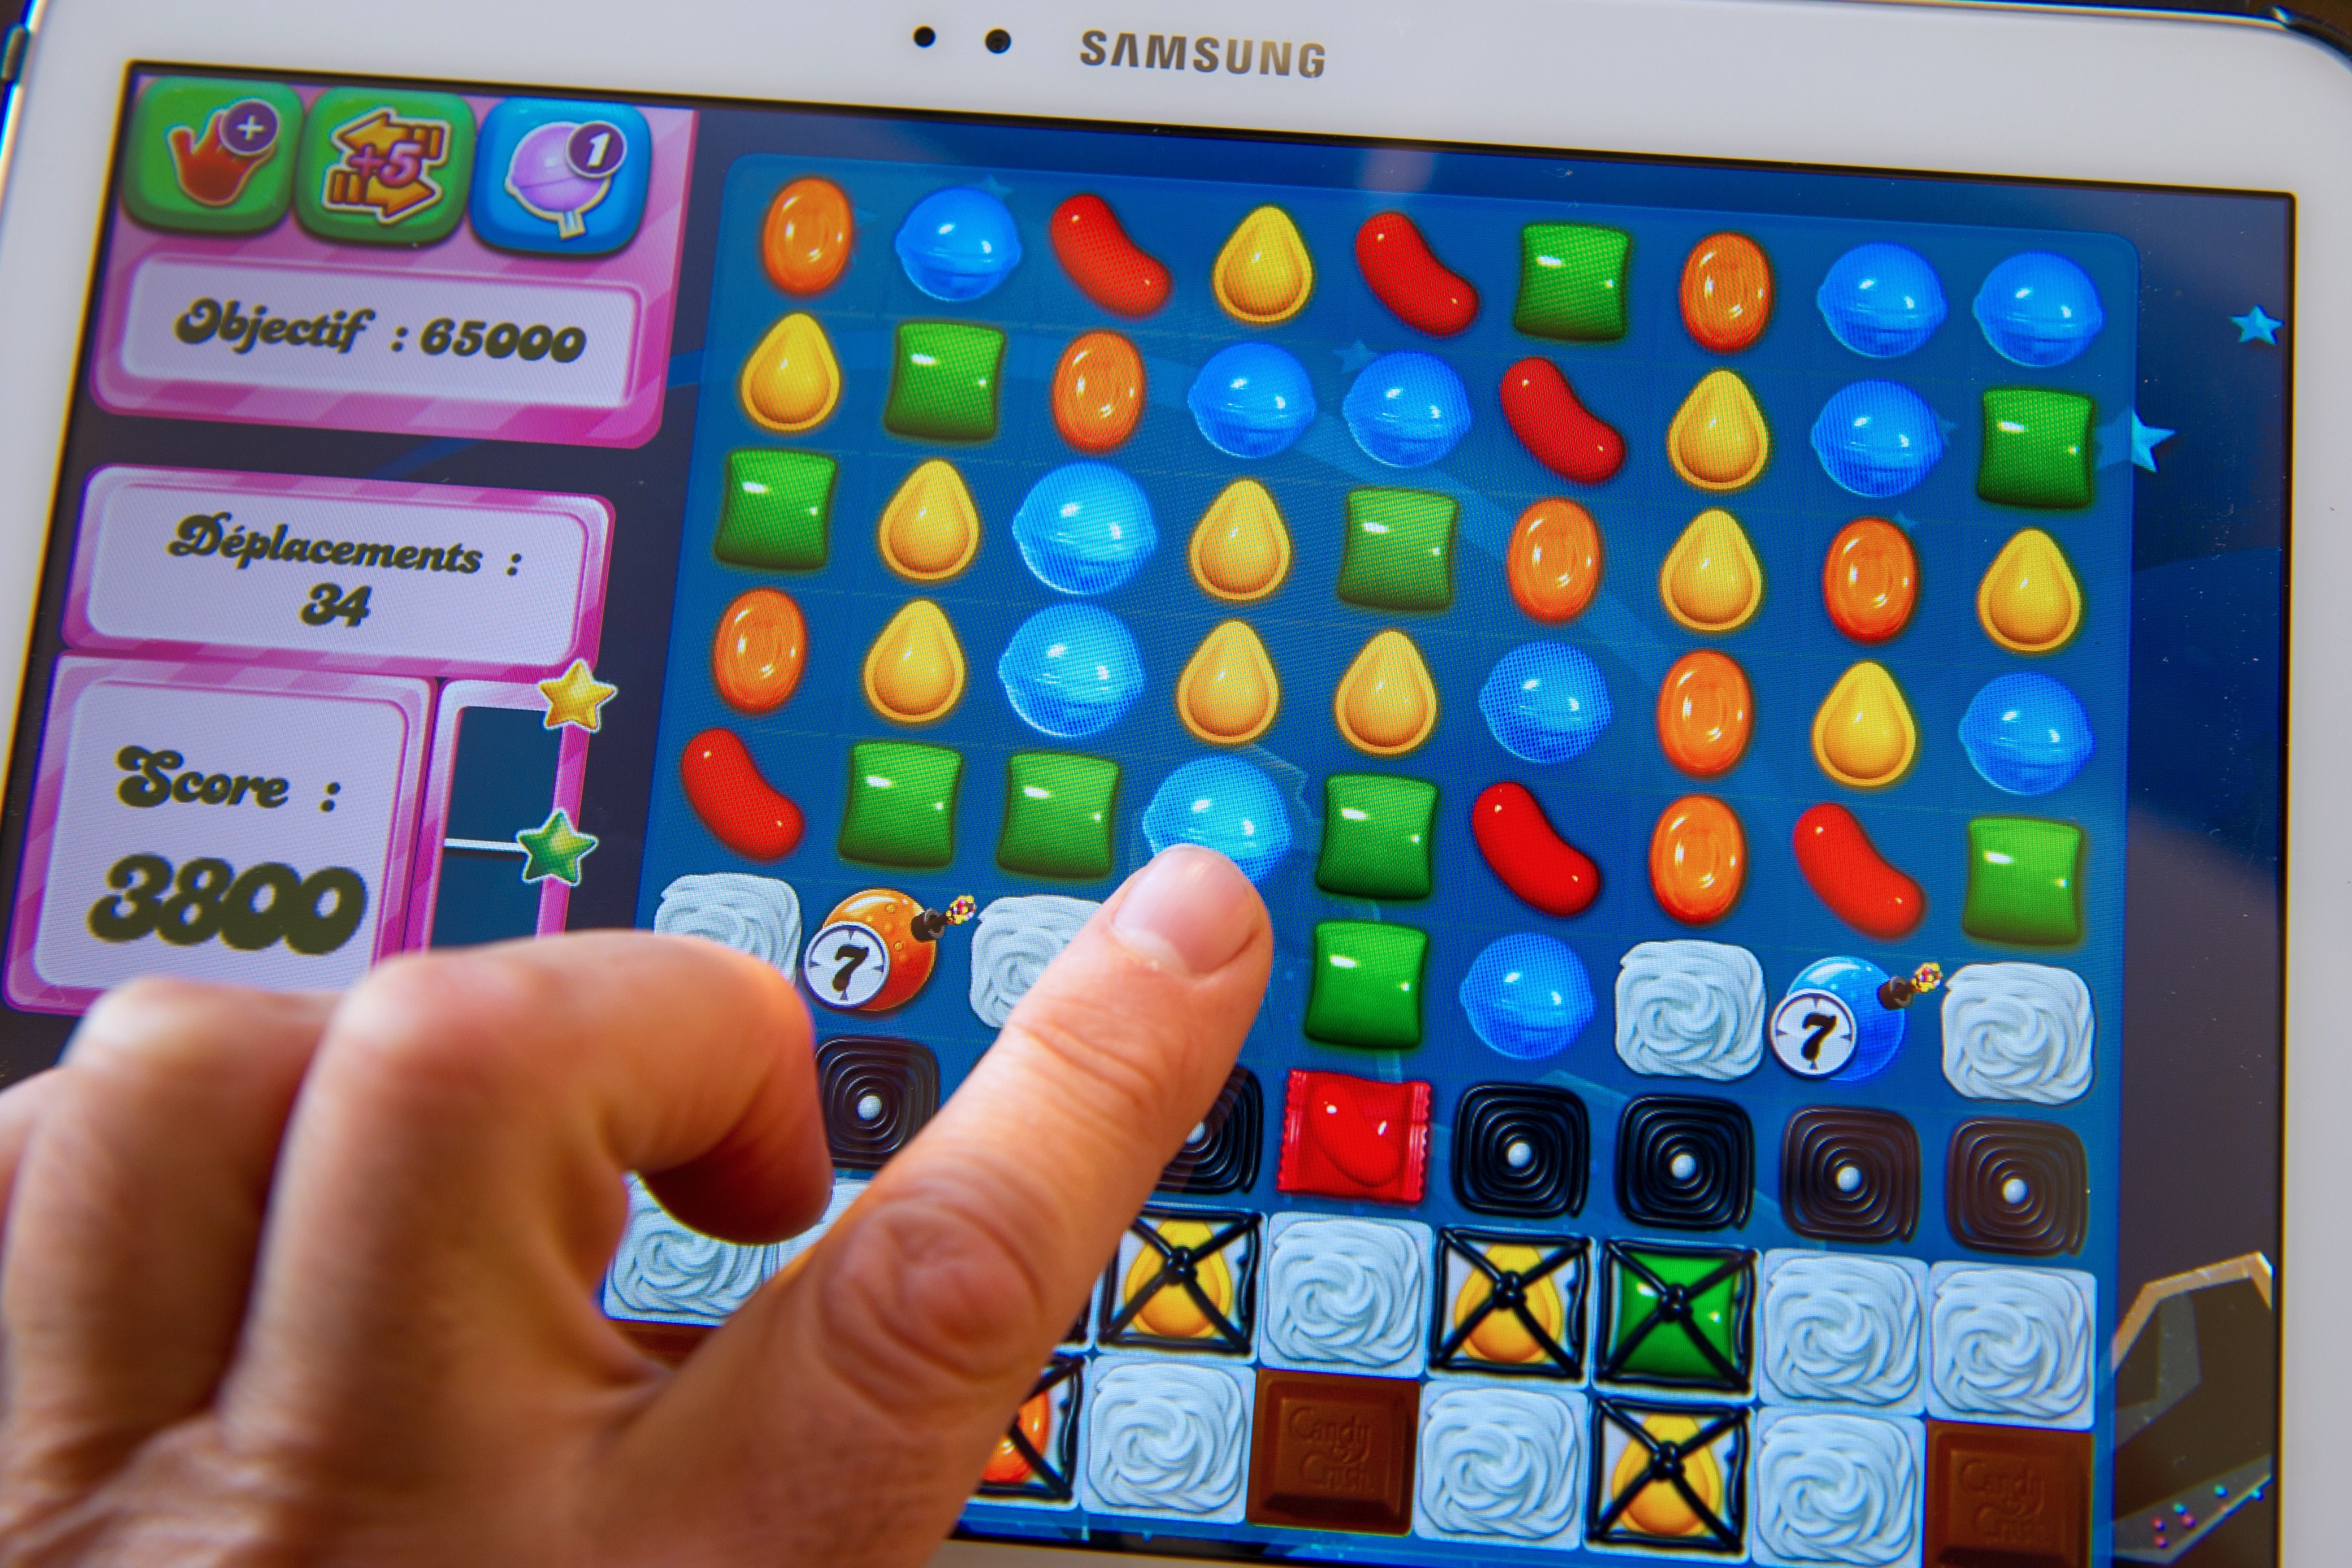 A person plays on his tablet with Candy Crush Saga games developed by British King Digital Entertainment, on March 6, 2014, in Lille, northern France. (Philippe Huguen&mdash;AFP/Getty Images)